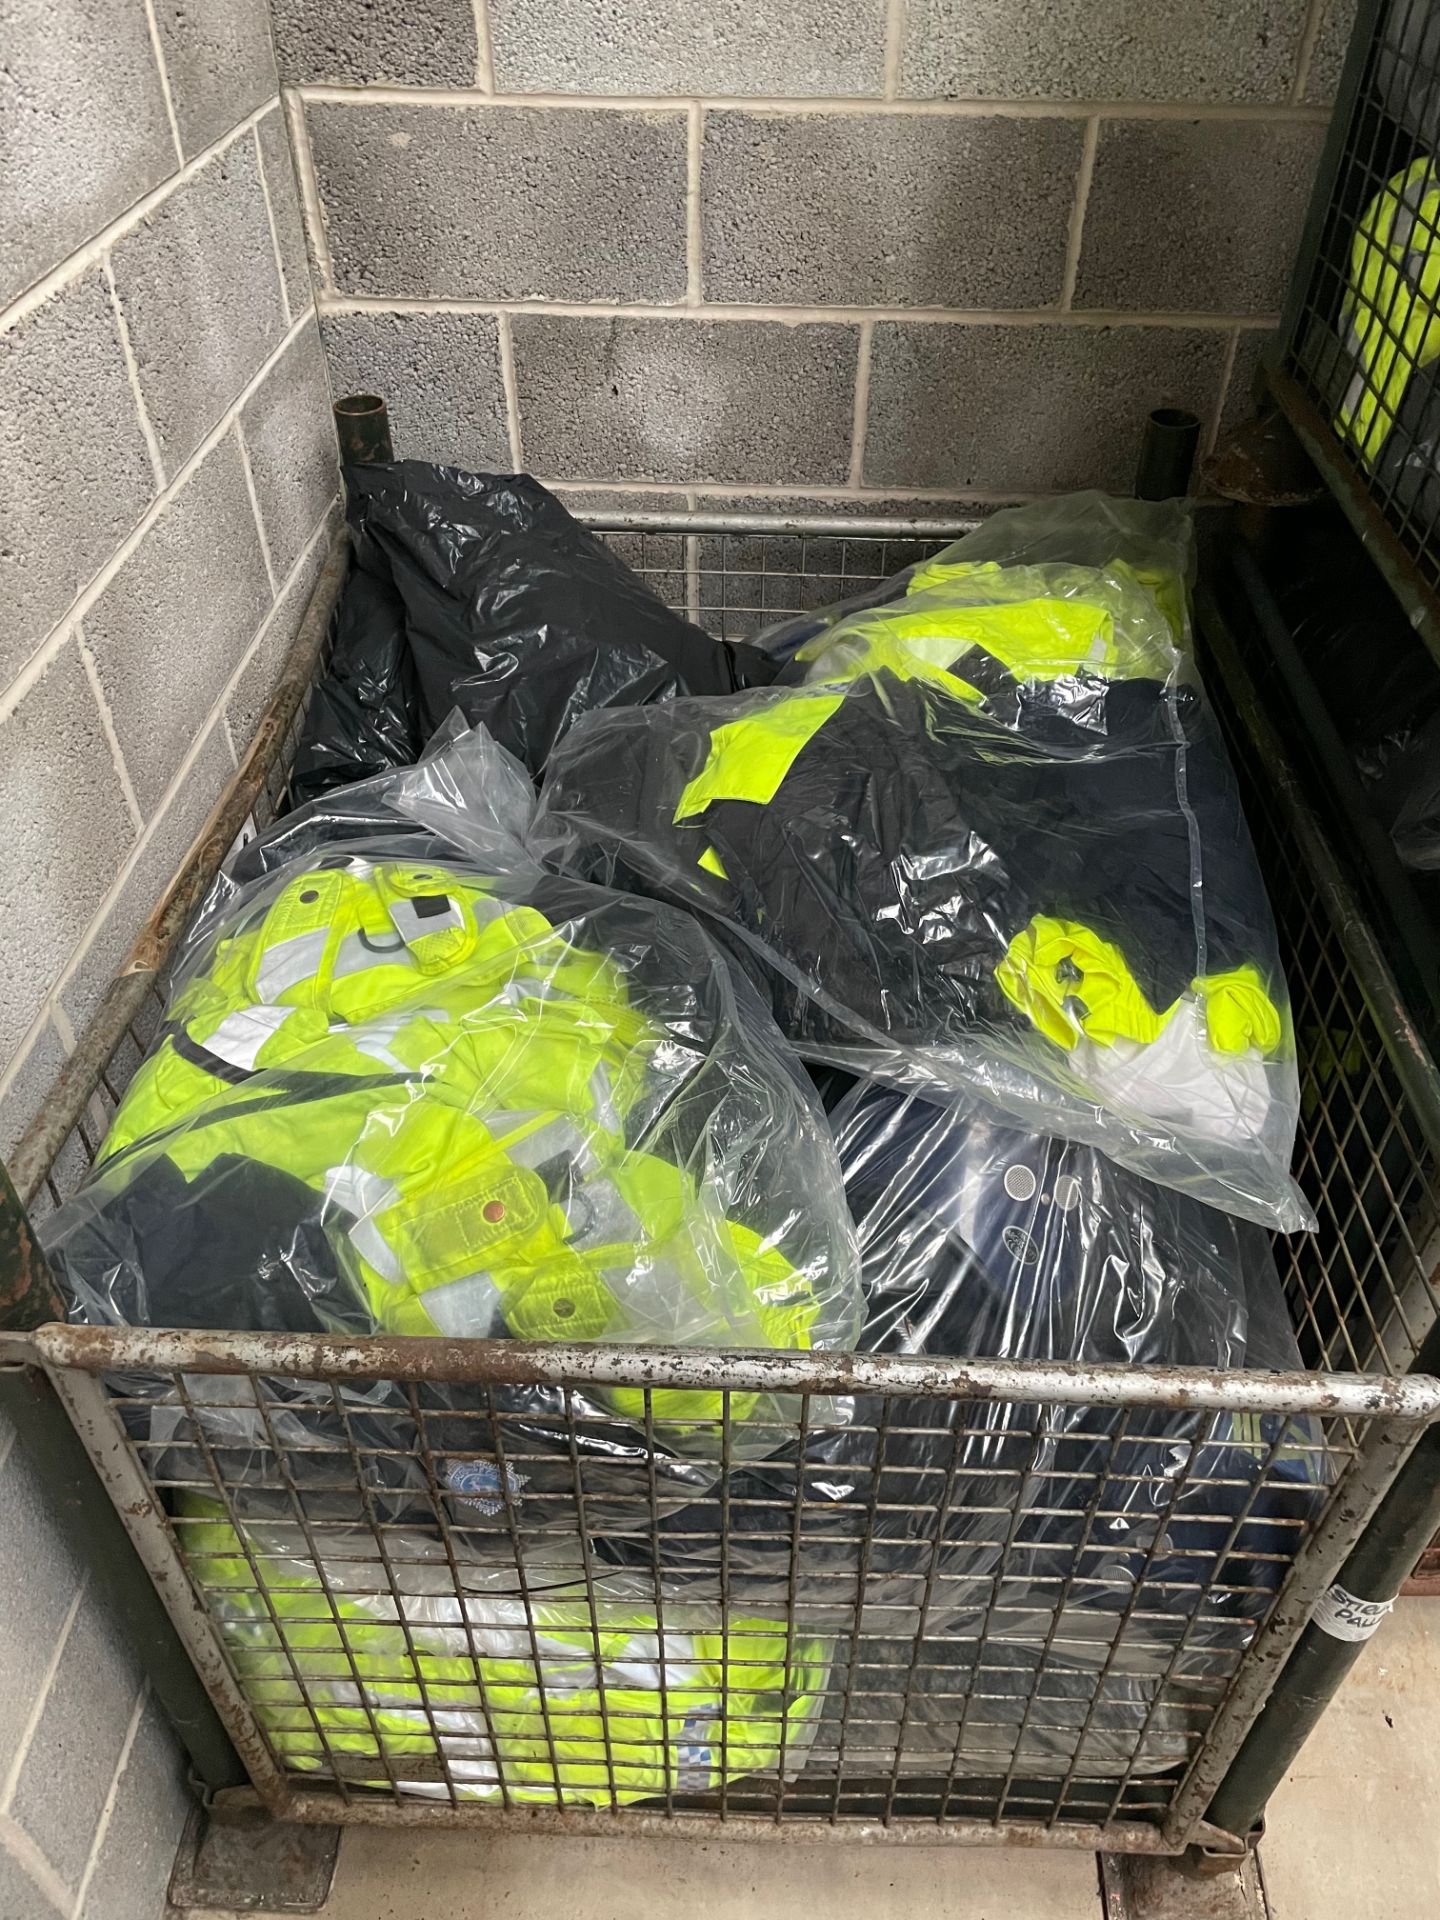 10 X BAGS OF EX POLICE CLOTHING - RRP £2750.00